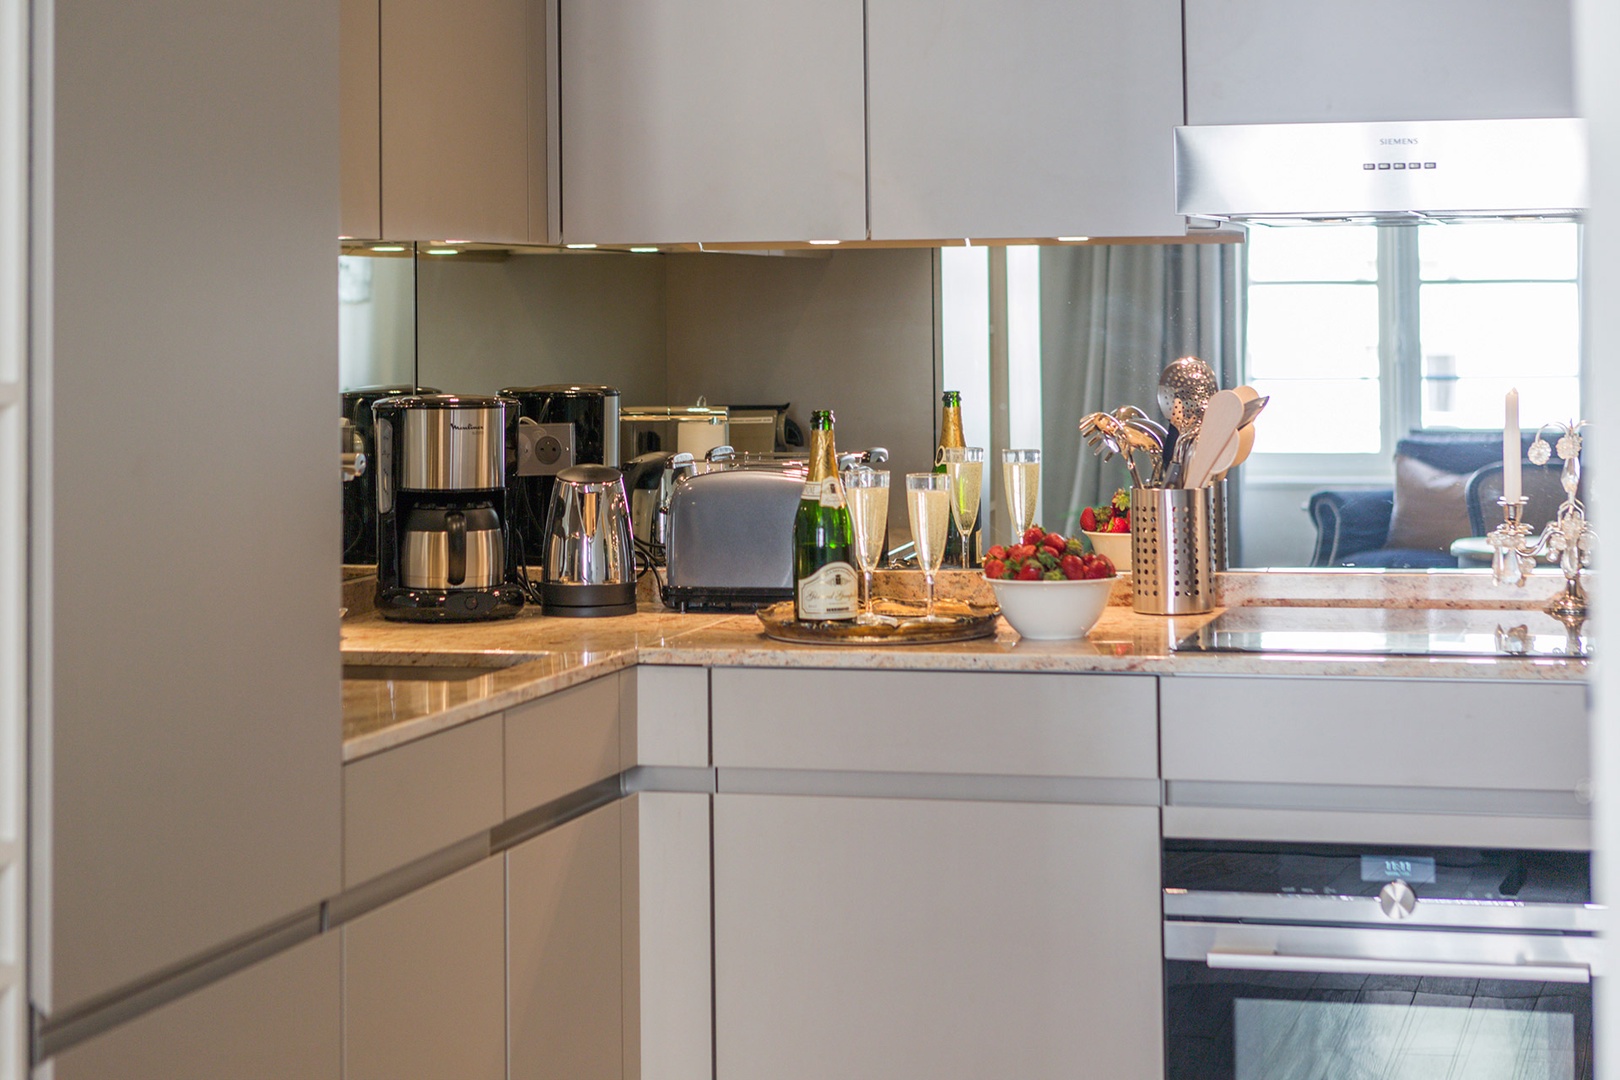 The fully equipped kitchen has everything to prepare home-cooked meals.